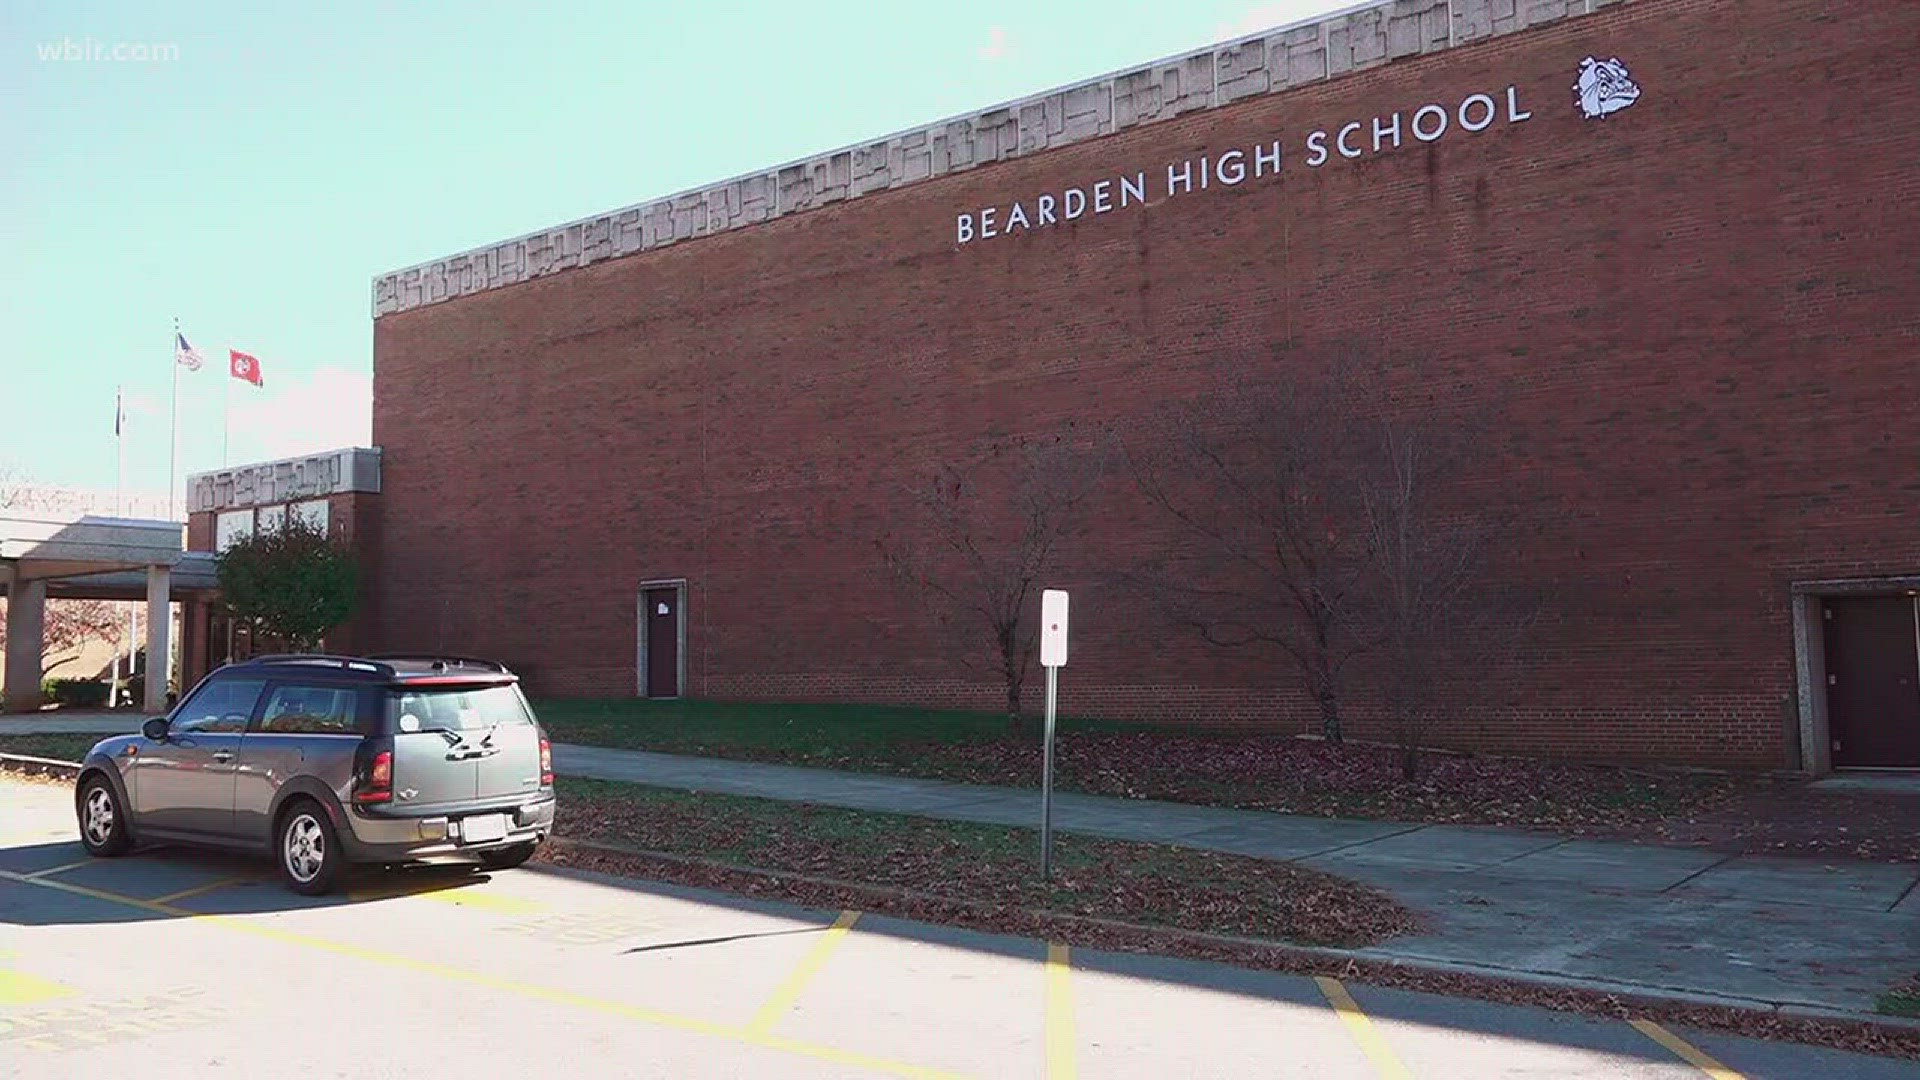 Nov. 16, 2017: Hundreds of Bearden High School students will have to retake the ACT after their appeal to have their "mis-administered" test validated was denied.